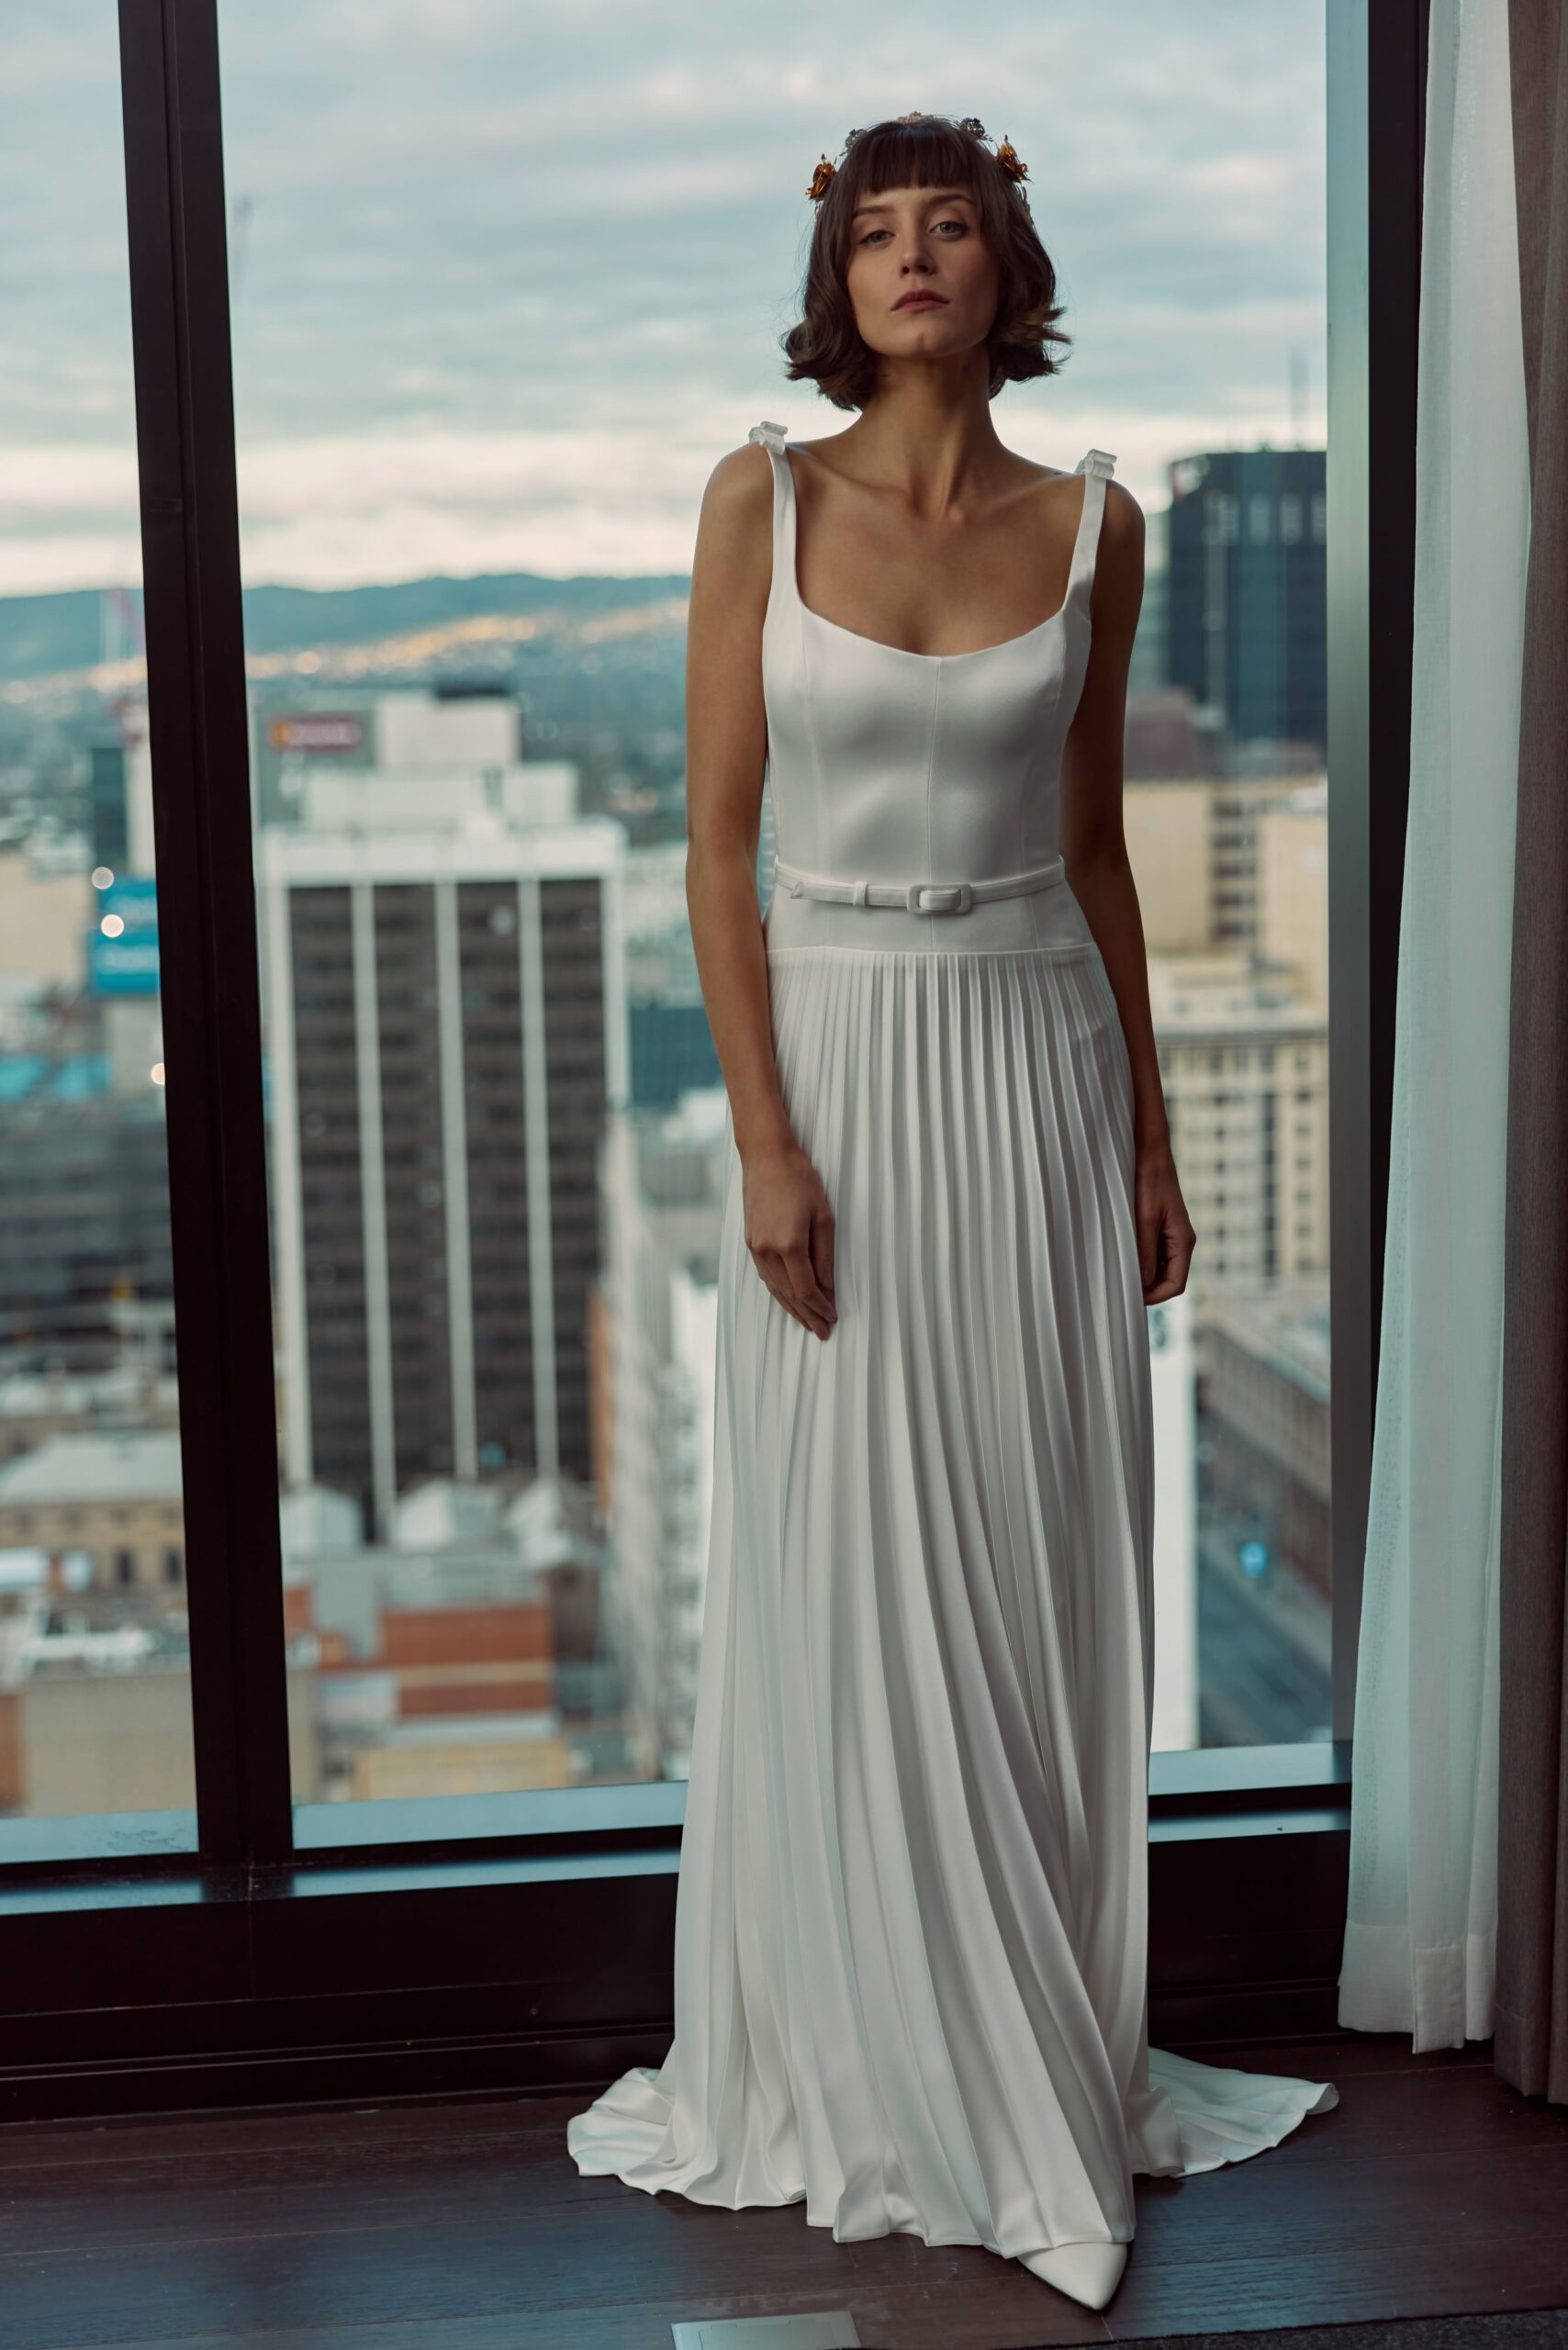 Lilou - An A-line gown featuring a drop waist, scoop neckline with straps, pleated skirt and a belt at the waist.